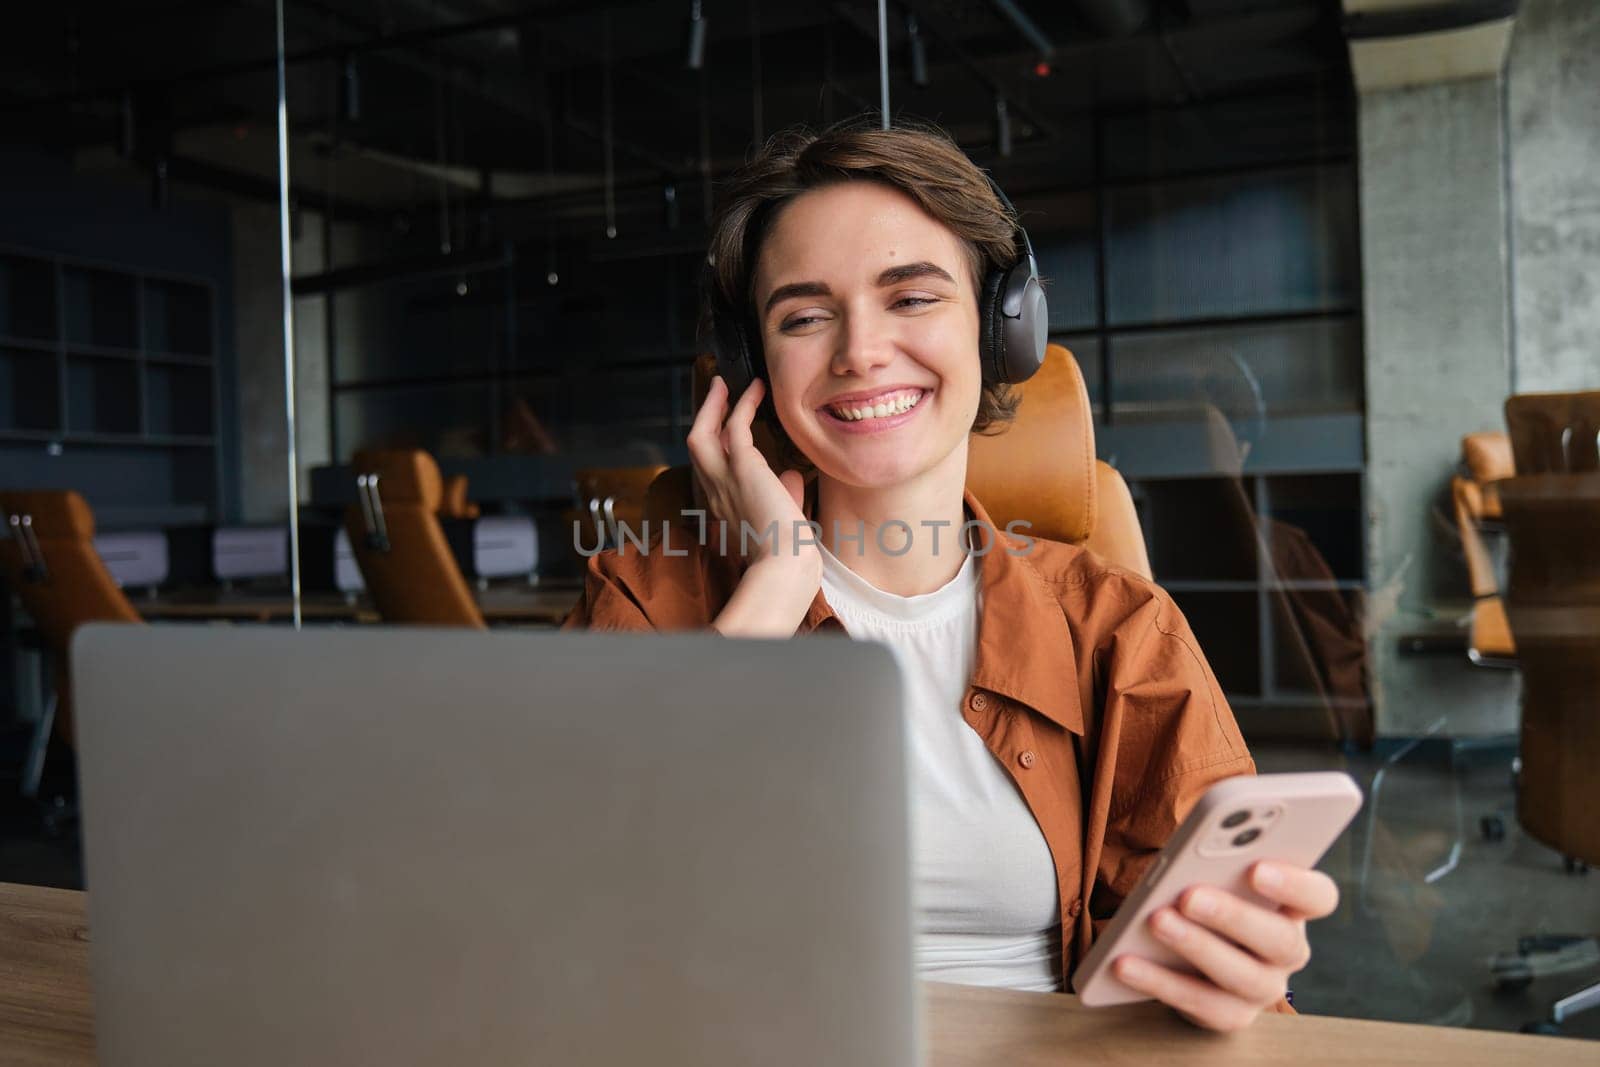 Successful business. Smiling woman entrepreneur, digital nomad in headphones, sitting in office with laptop and smartphone, working at workplace.